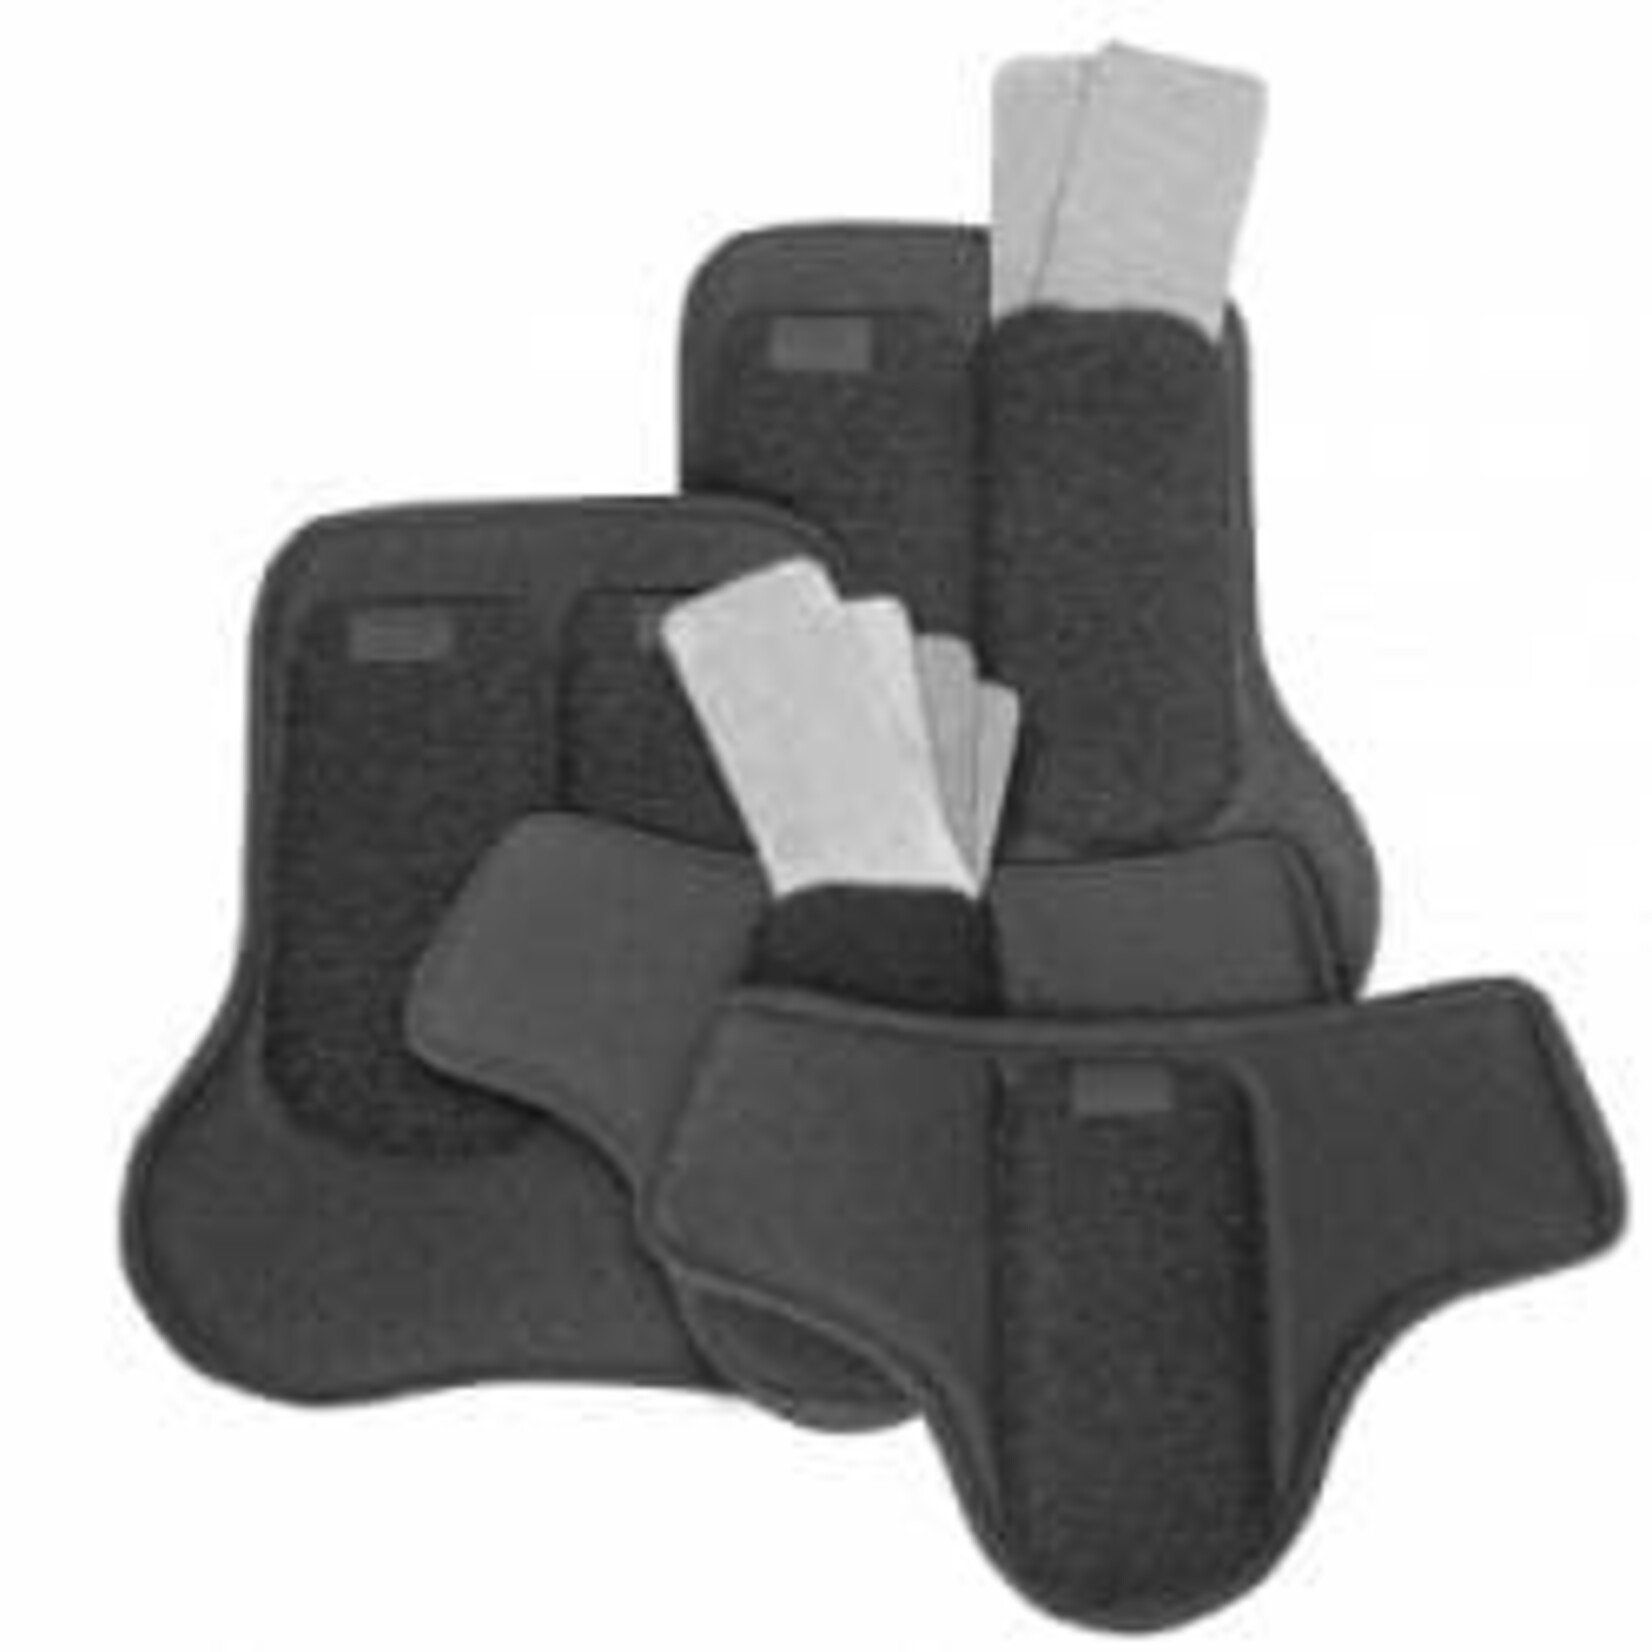 01288 Equifit Weighted T-Foam liners for Hind Luxe boots, sold as a pair